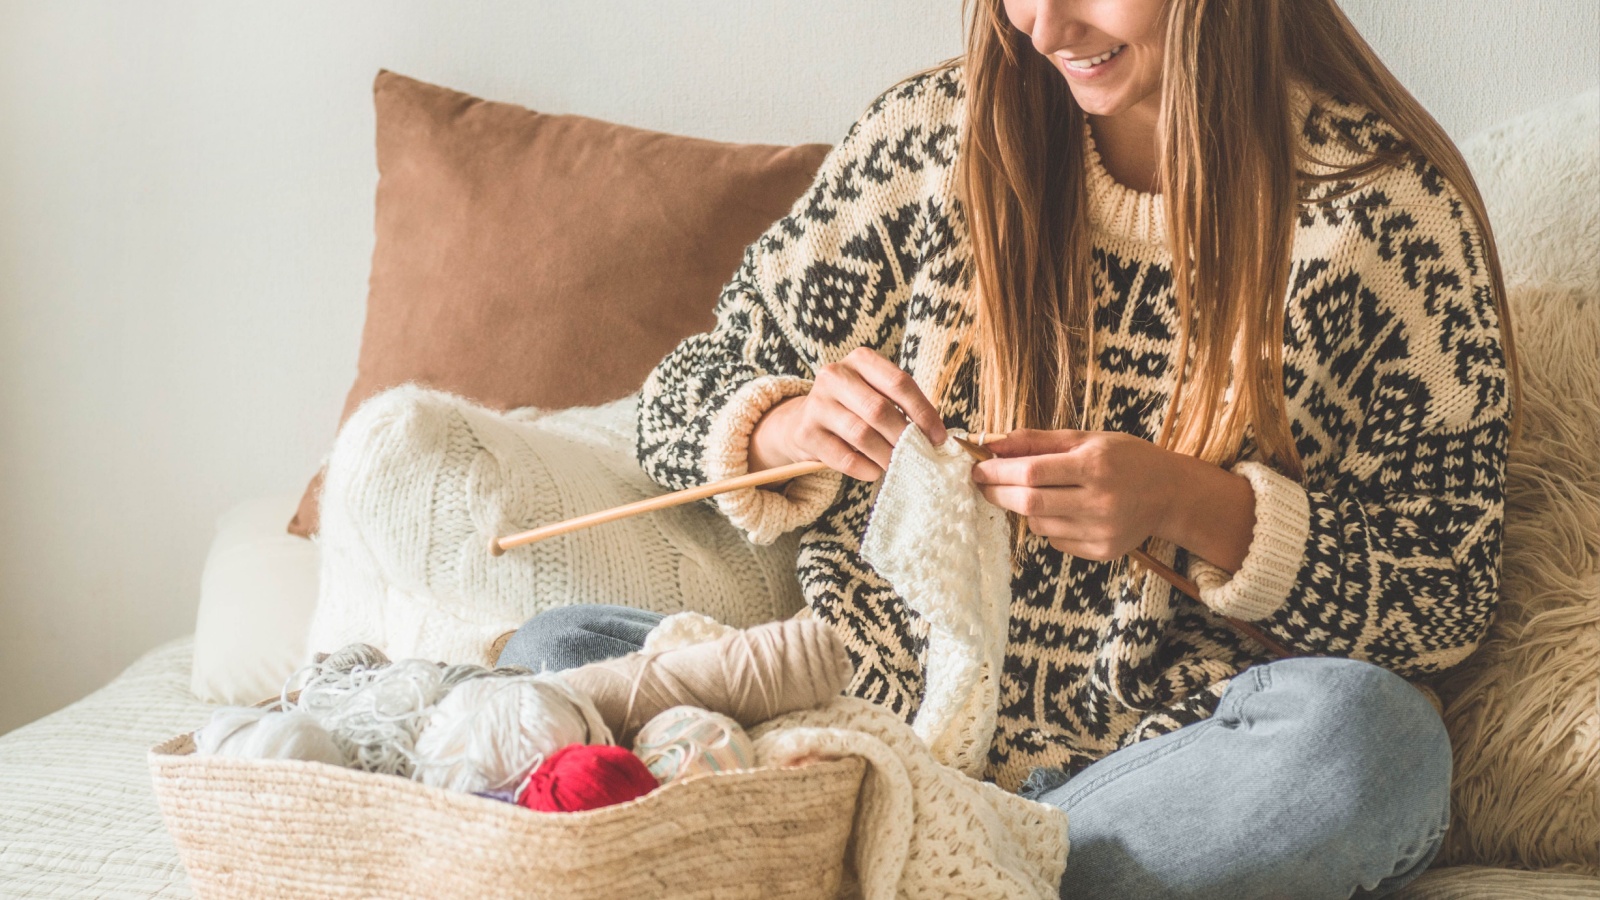 Beautiful girl knits a warm sweater on the bed. Knitting as a hobby. Accessories for knitting.